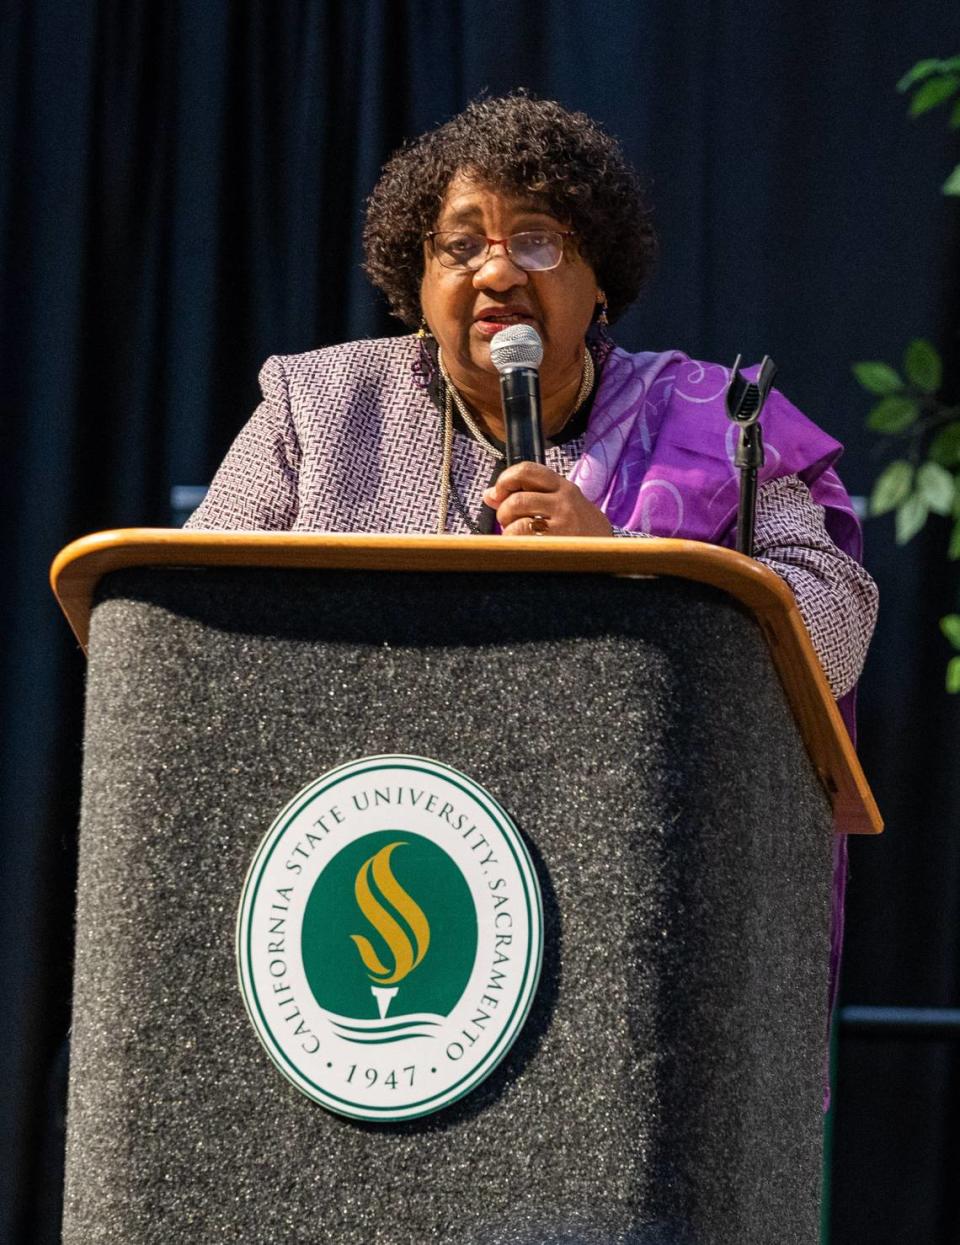 California Secretary of State Shirley Weber gives a speech on reparations as part of the Green & Gold speaker series in the University Union Ballroom at Sacramento State on Tuesday, Feb. 7, 2023.